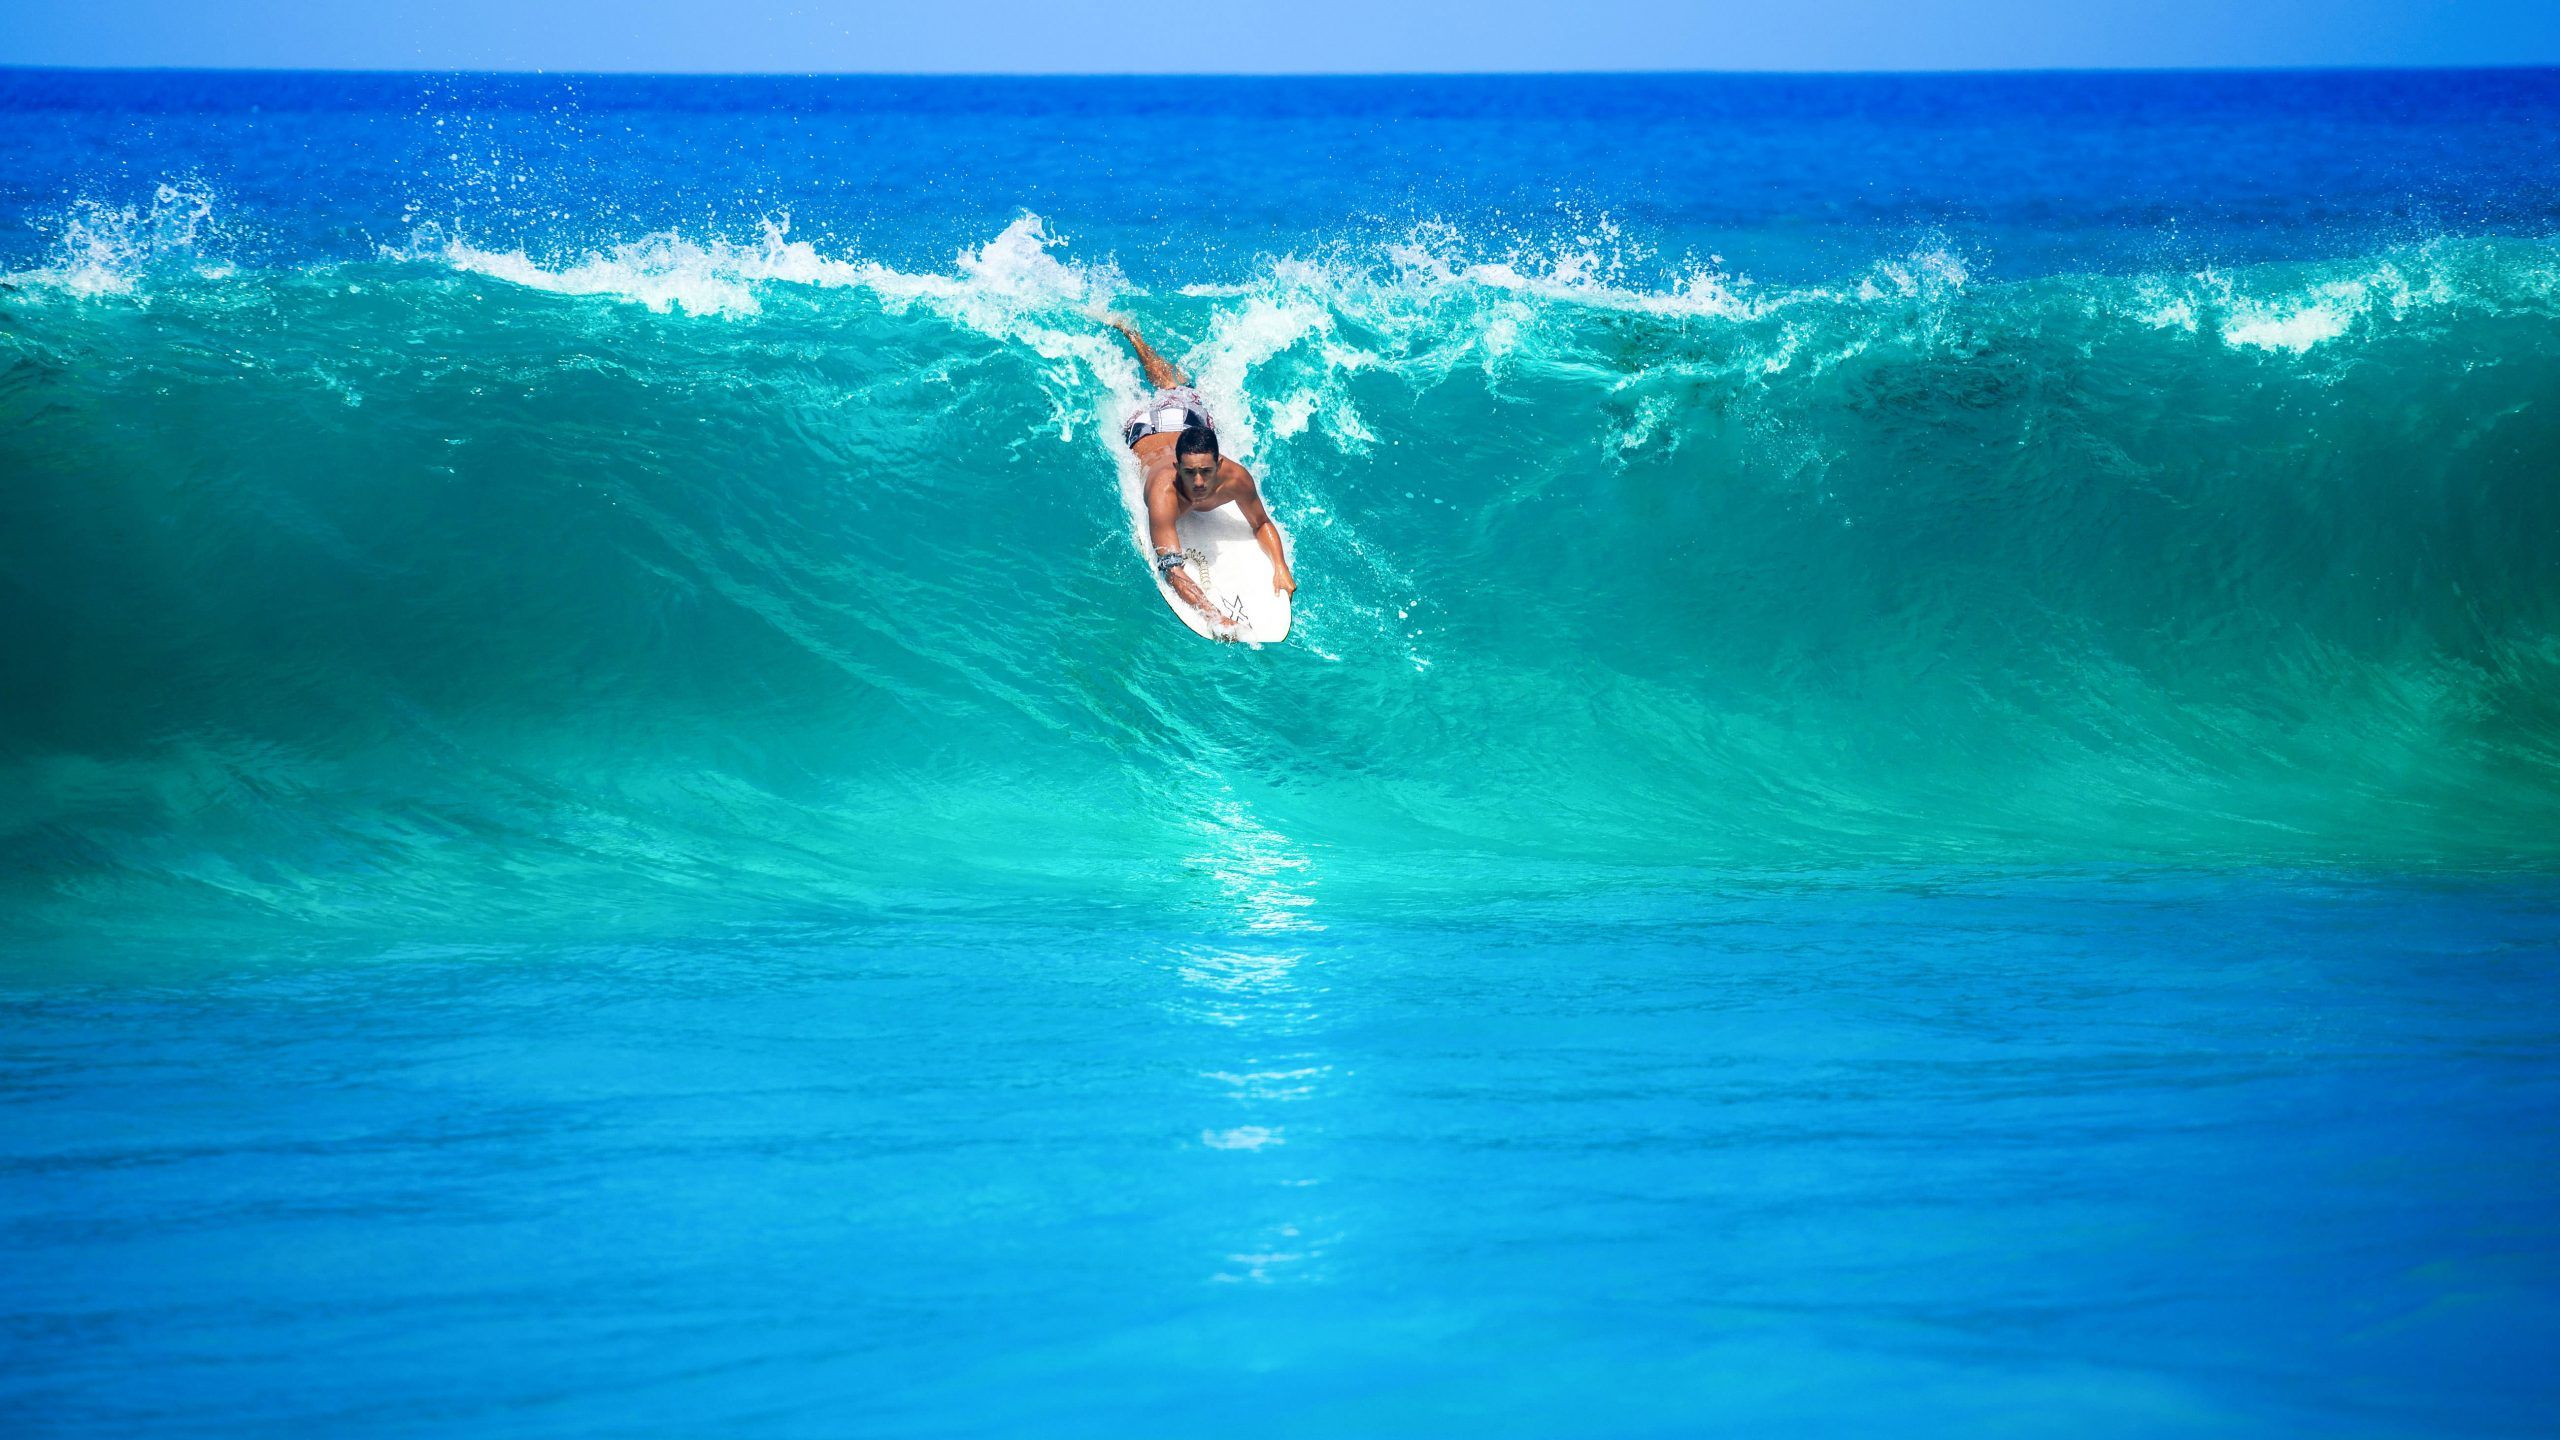 A surfer rides a wave in the bright blue ocean. - Surf